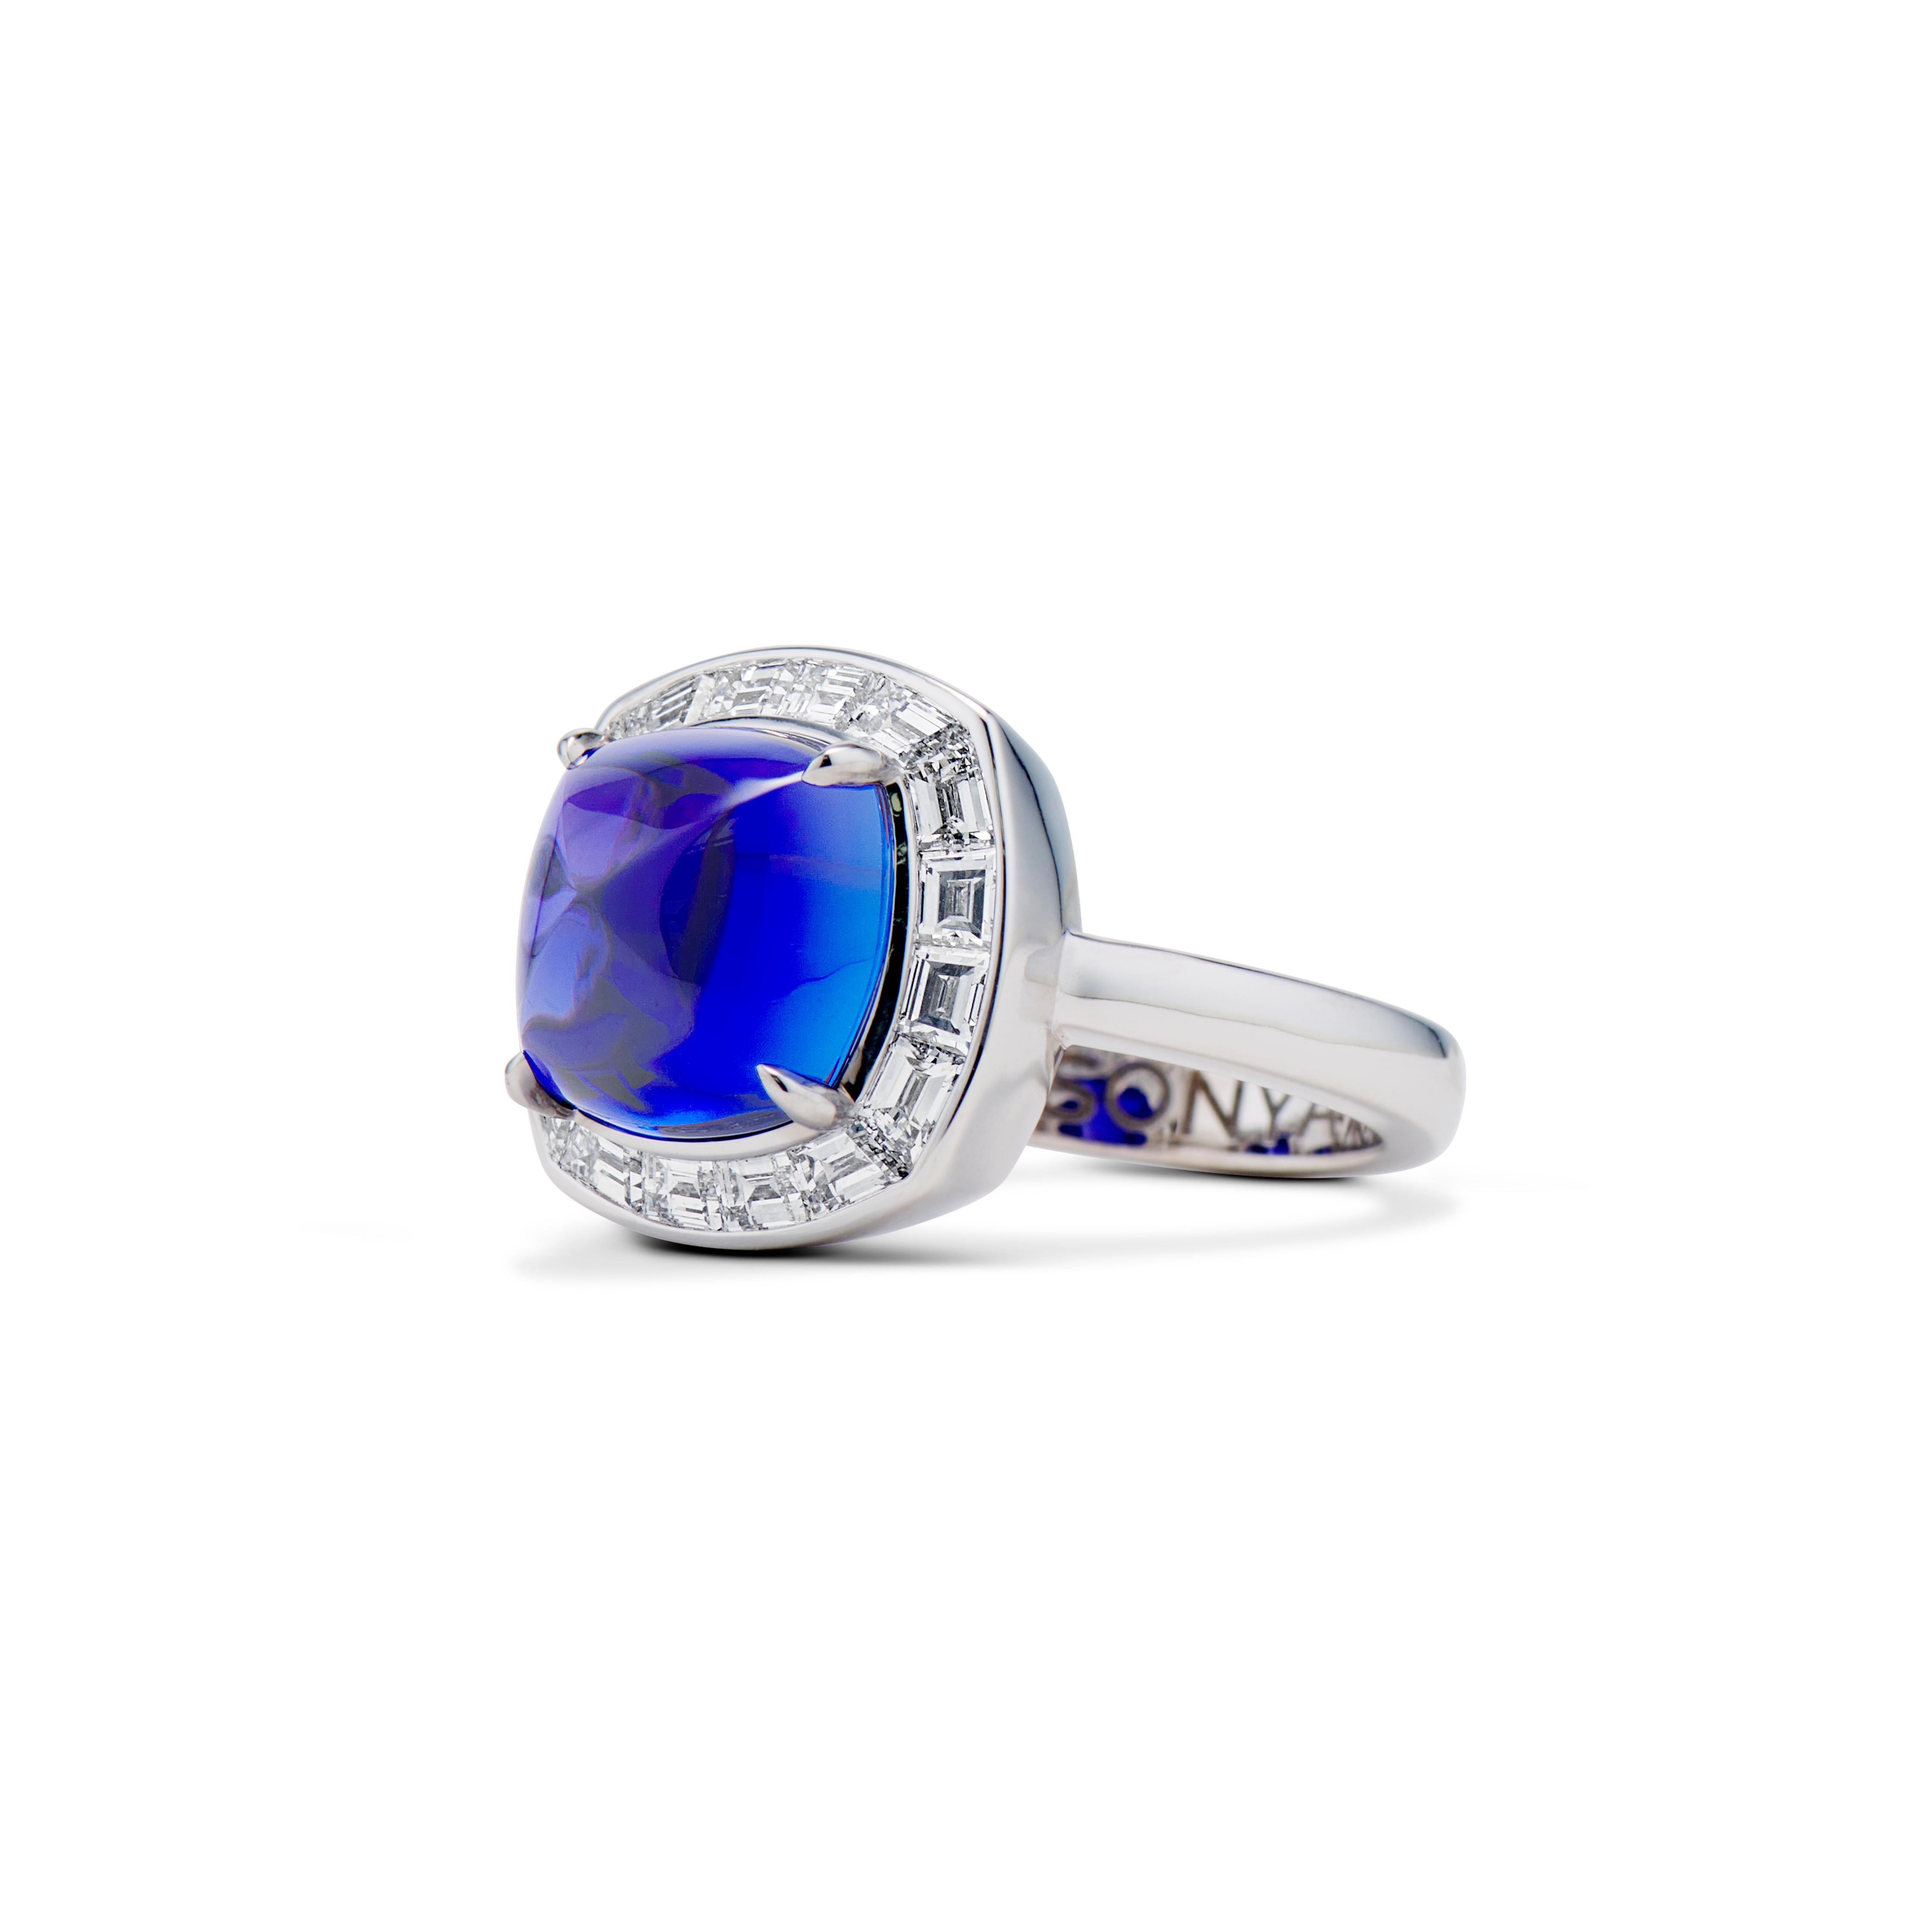 The centerpiece of the ring is a 5.62 ct Tanzanite sugarloaf with a rich violet-blue color that gives it a royal feeling. The main stone is surrounded by 1.52 ct D-F VS baguette-cut diamonds.

The ring is handcrafted in 18K white gold.

Ring size: